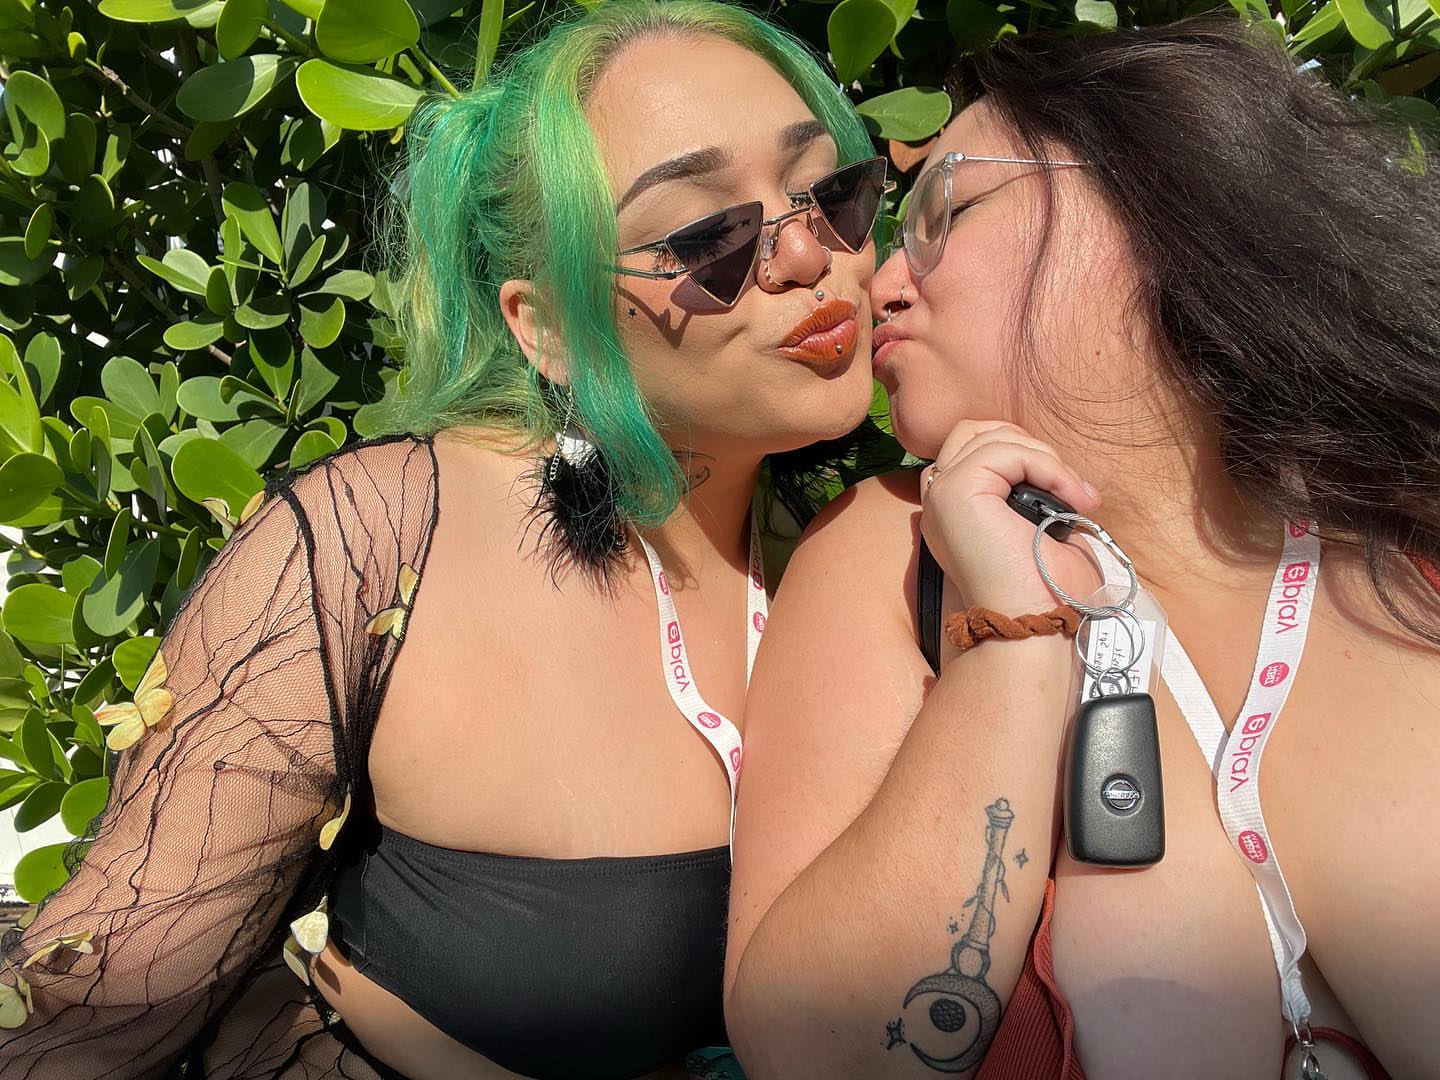 Everyone needs a slutty friend with green hair 💚

@prissybbyx